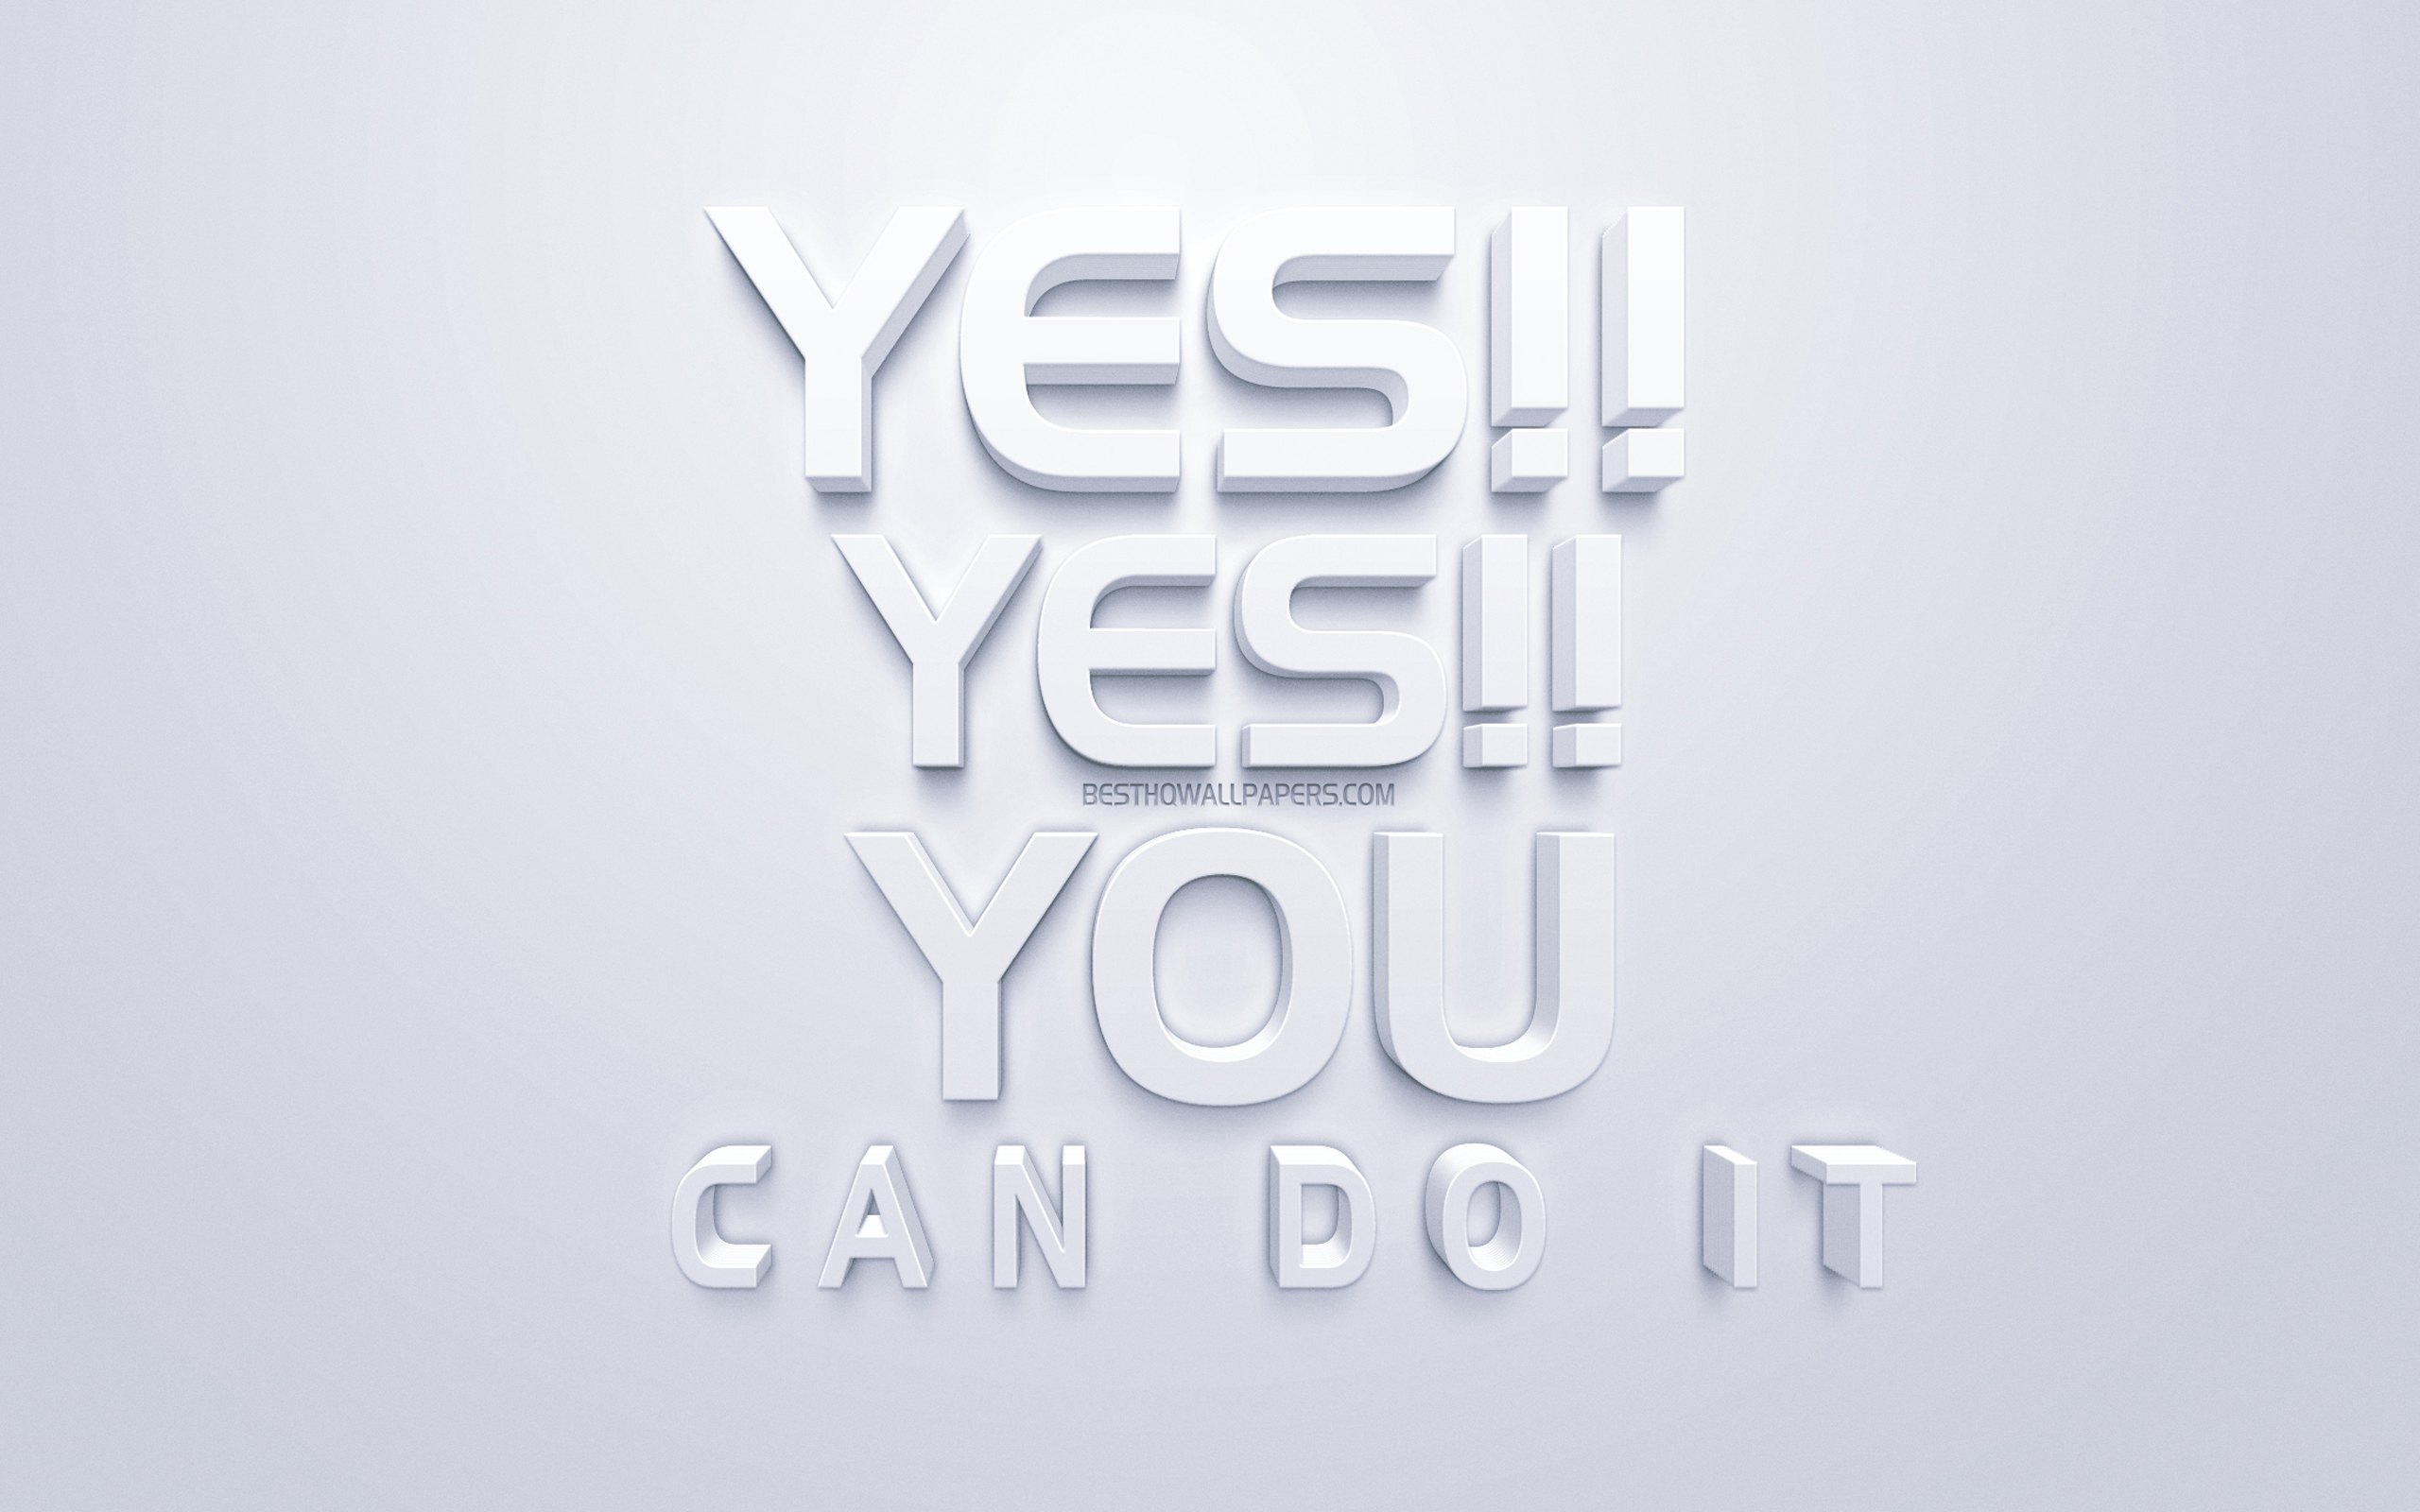 Download wallpaper Yes Yes You can do it, motivation quotes, white 3D art, white background, inspiration popular quotes for desktop with resolution 2560x1600. High Quality HD picture wallpaper